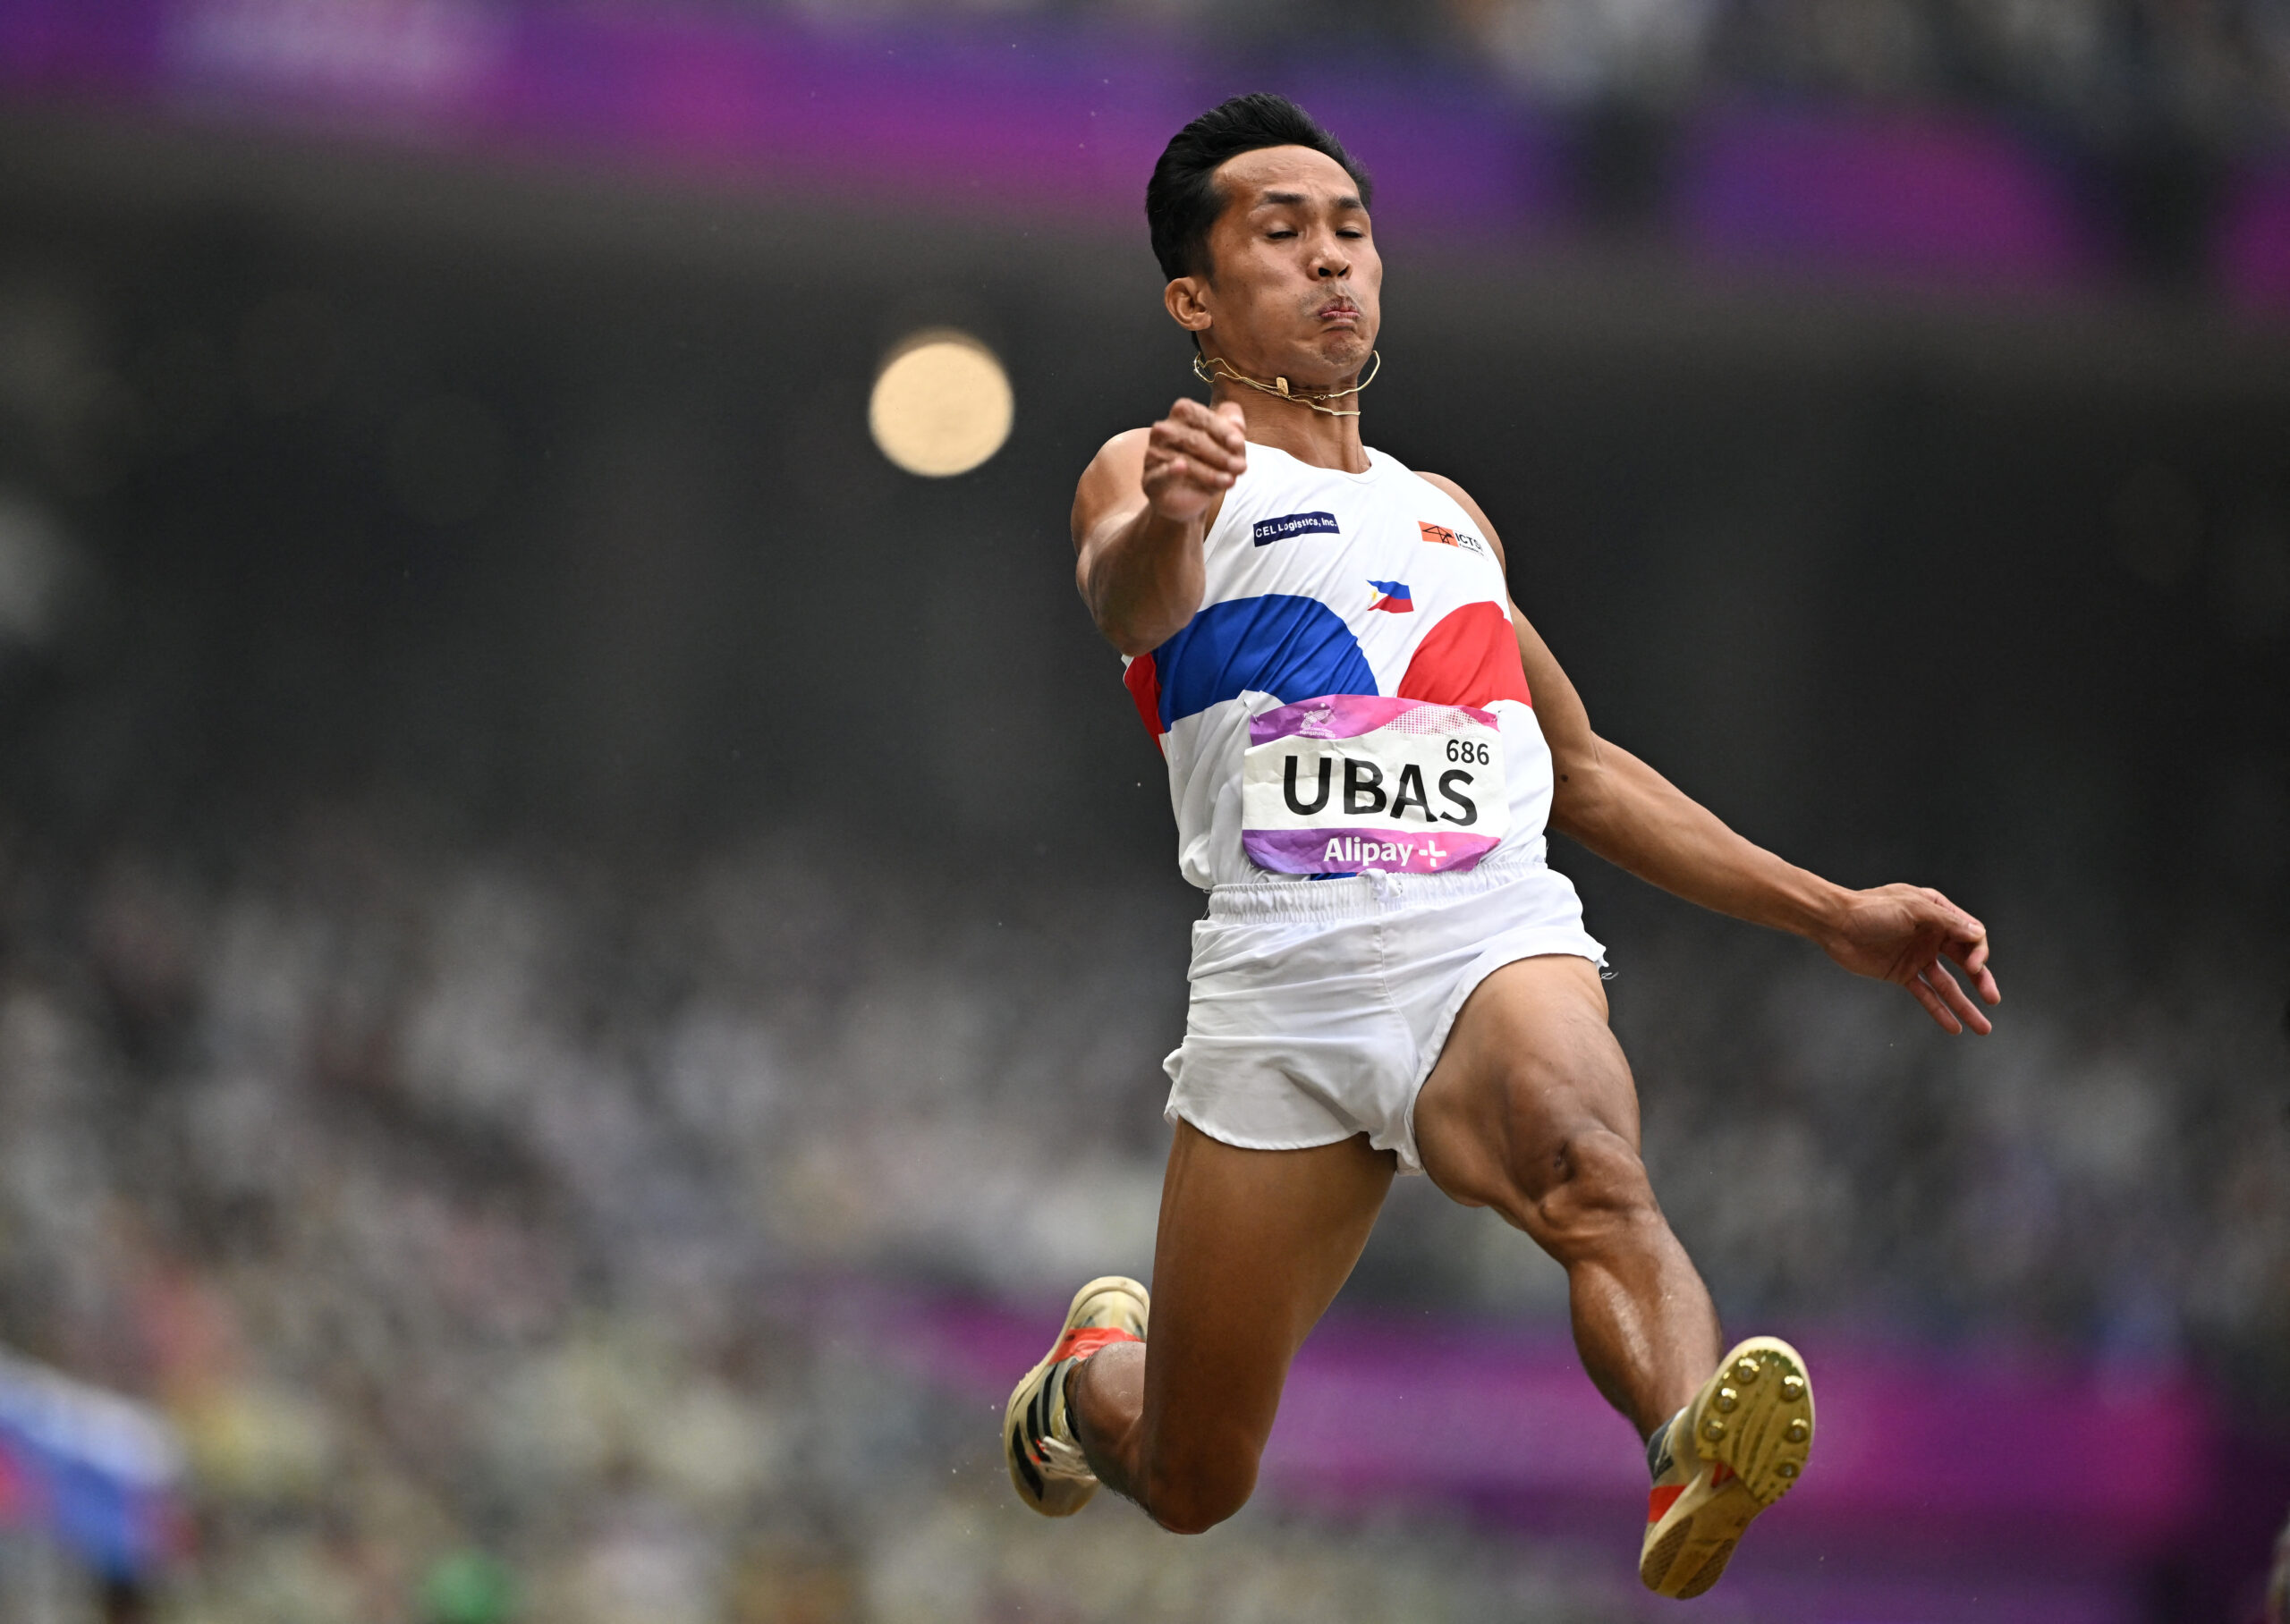 Asian Games - Hangzhou 2022 - Athletics - Olympic Sports Centre Stadium, Hangzhou, China - September 30, 2023 Philippines' Janryv Ubas in action during the men's long jump qualification - group B 